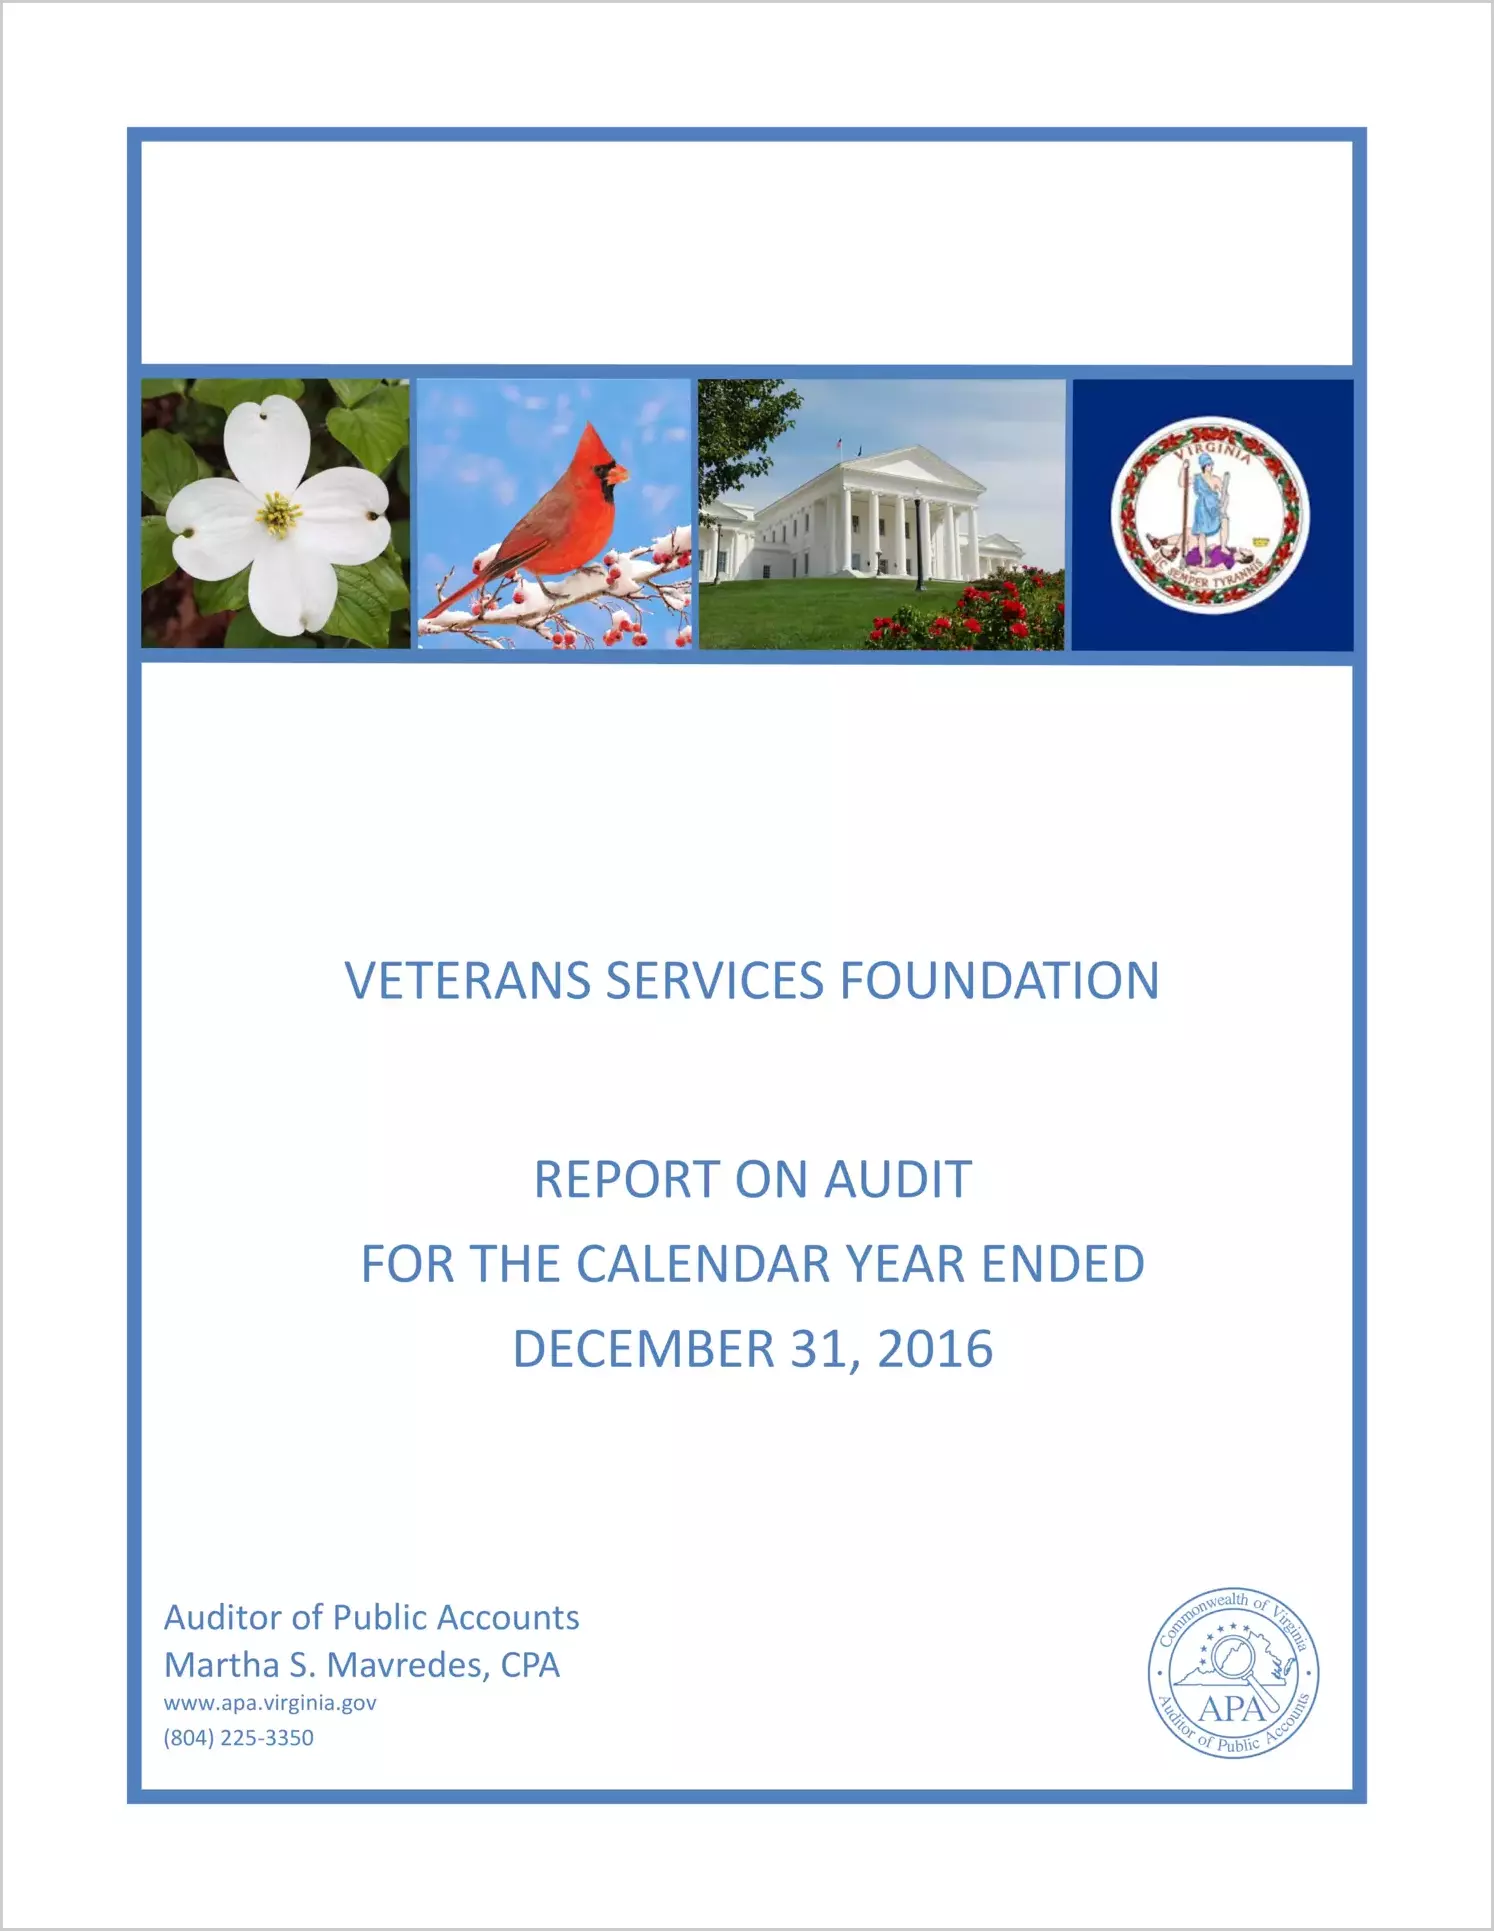 Veterans Services Foundation for the Calendar Year Ended December 31, 2016